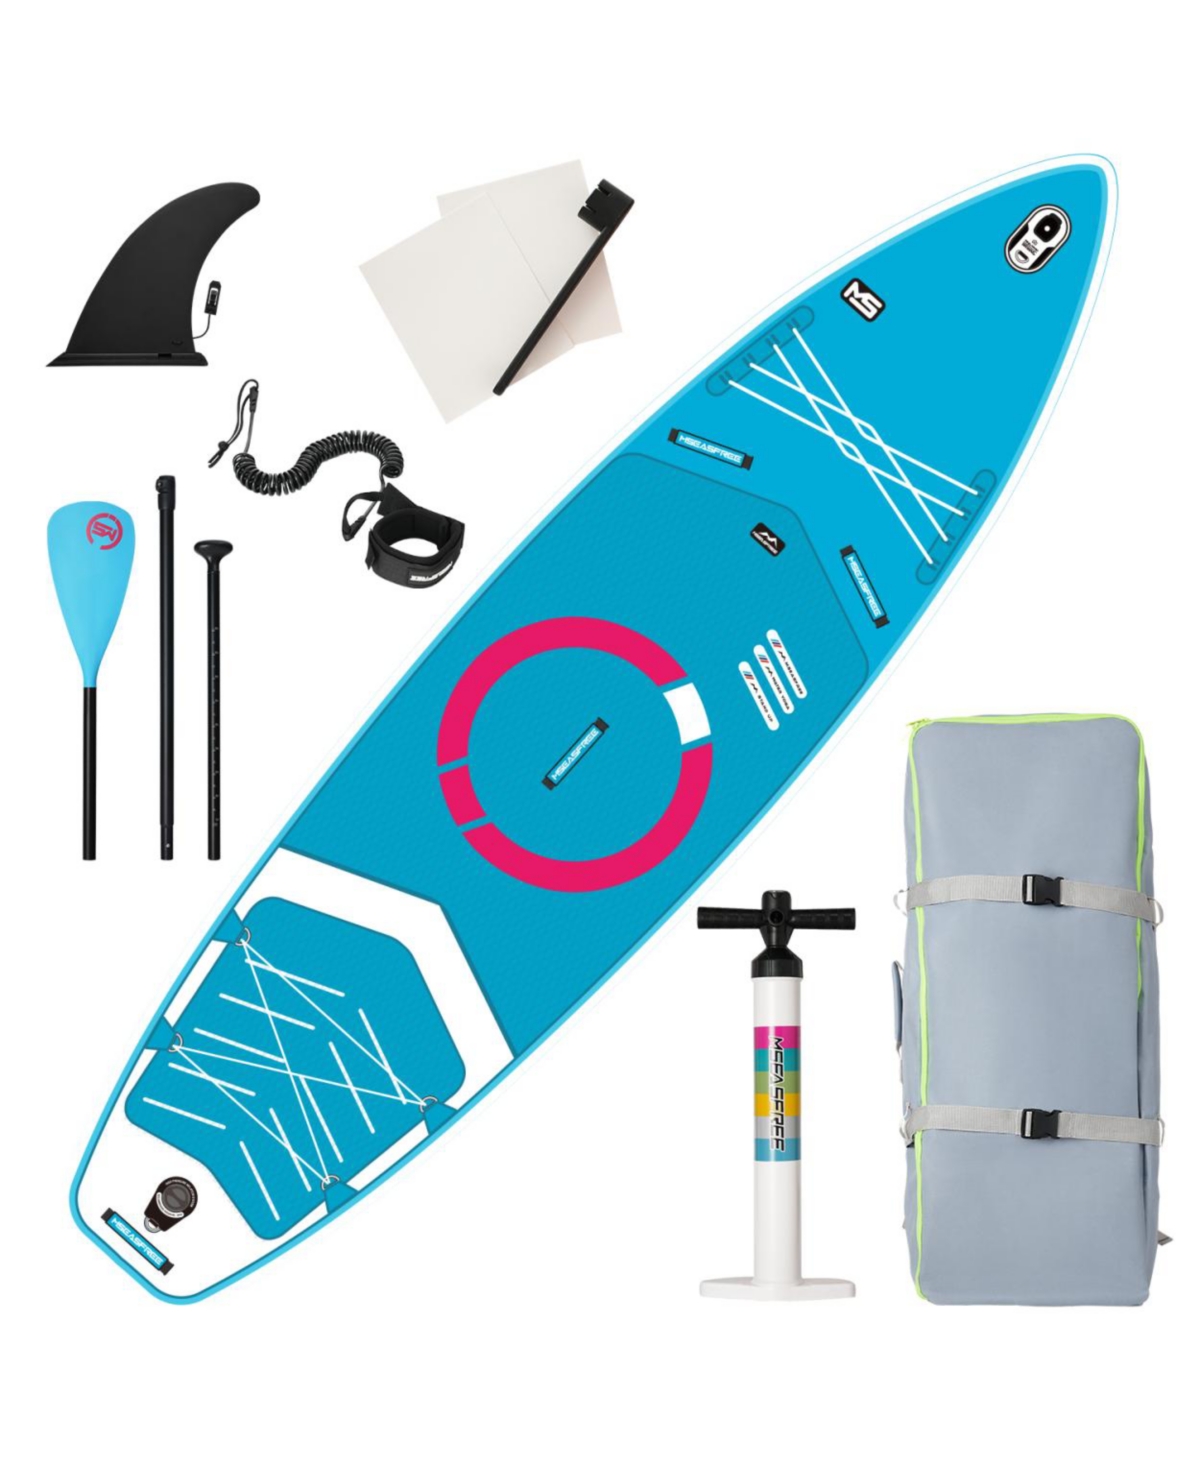 Inflatable Stand Up Paddle Board 11'X34" X6" With Accessories - Blue